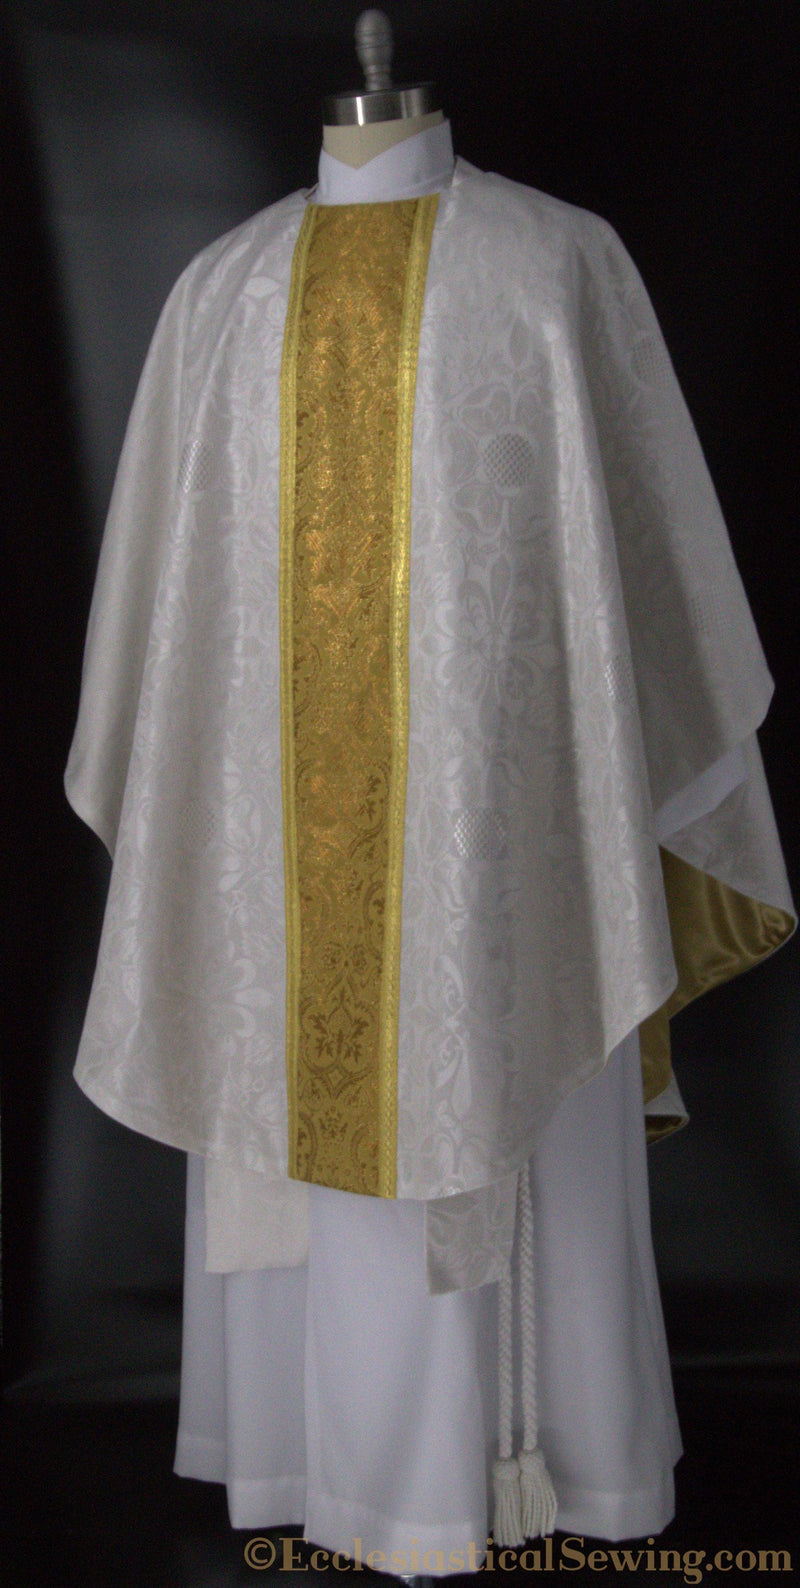 files/dayspring-white-gold-priest-chasuble-or-christmas-easter-priest-chasuble-ecclesiastical-sewing-3-31790022197504.jpg